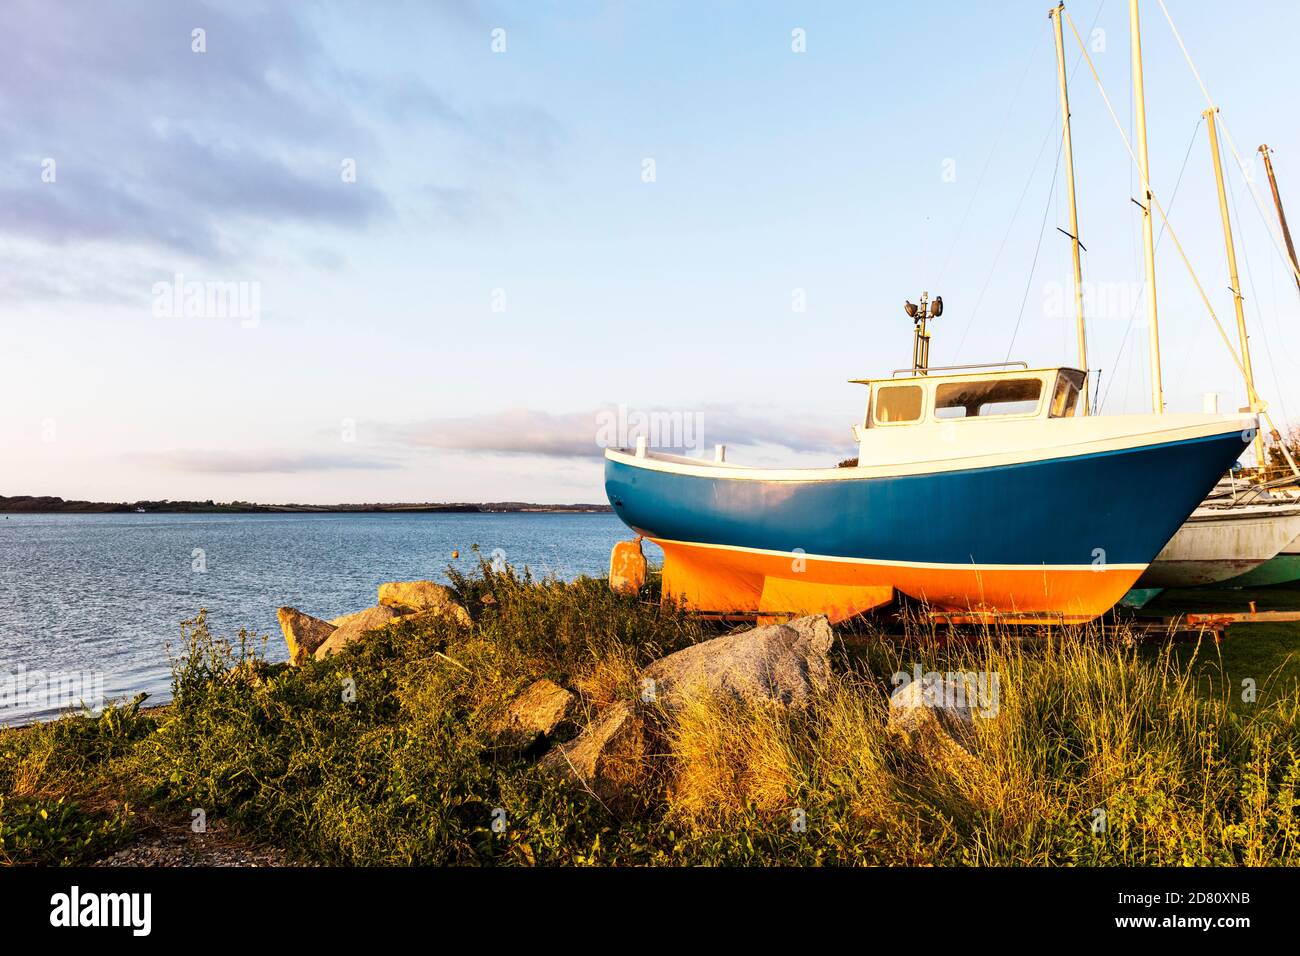 Boats on dry land, boats ashore, boat on dry land, boats dry dock, boats out of water, boat ashore, boats on land, boats on dry ground, boats, ashore Stock Photo